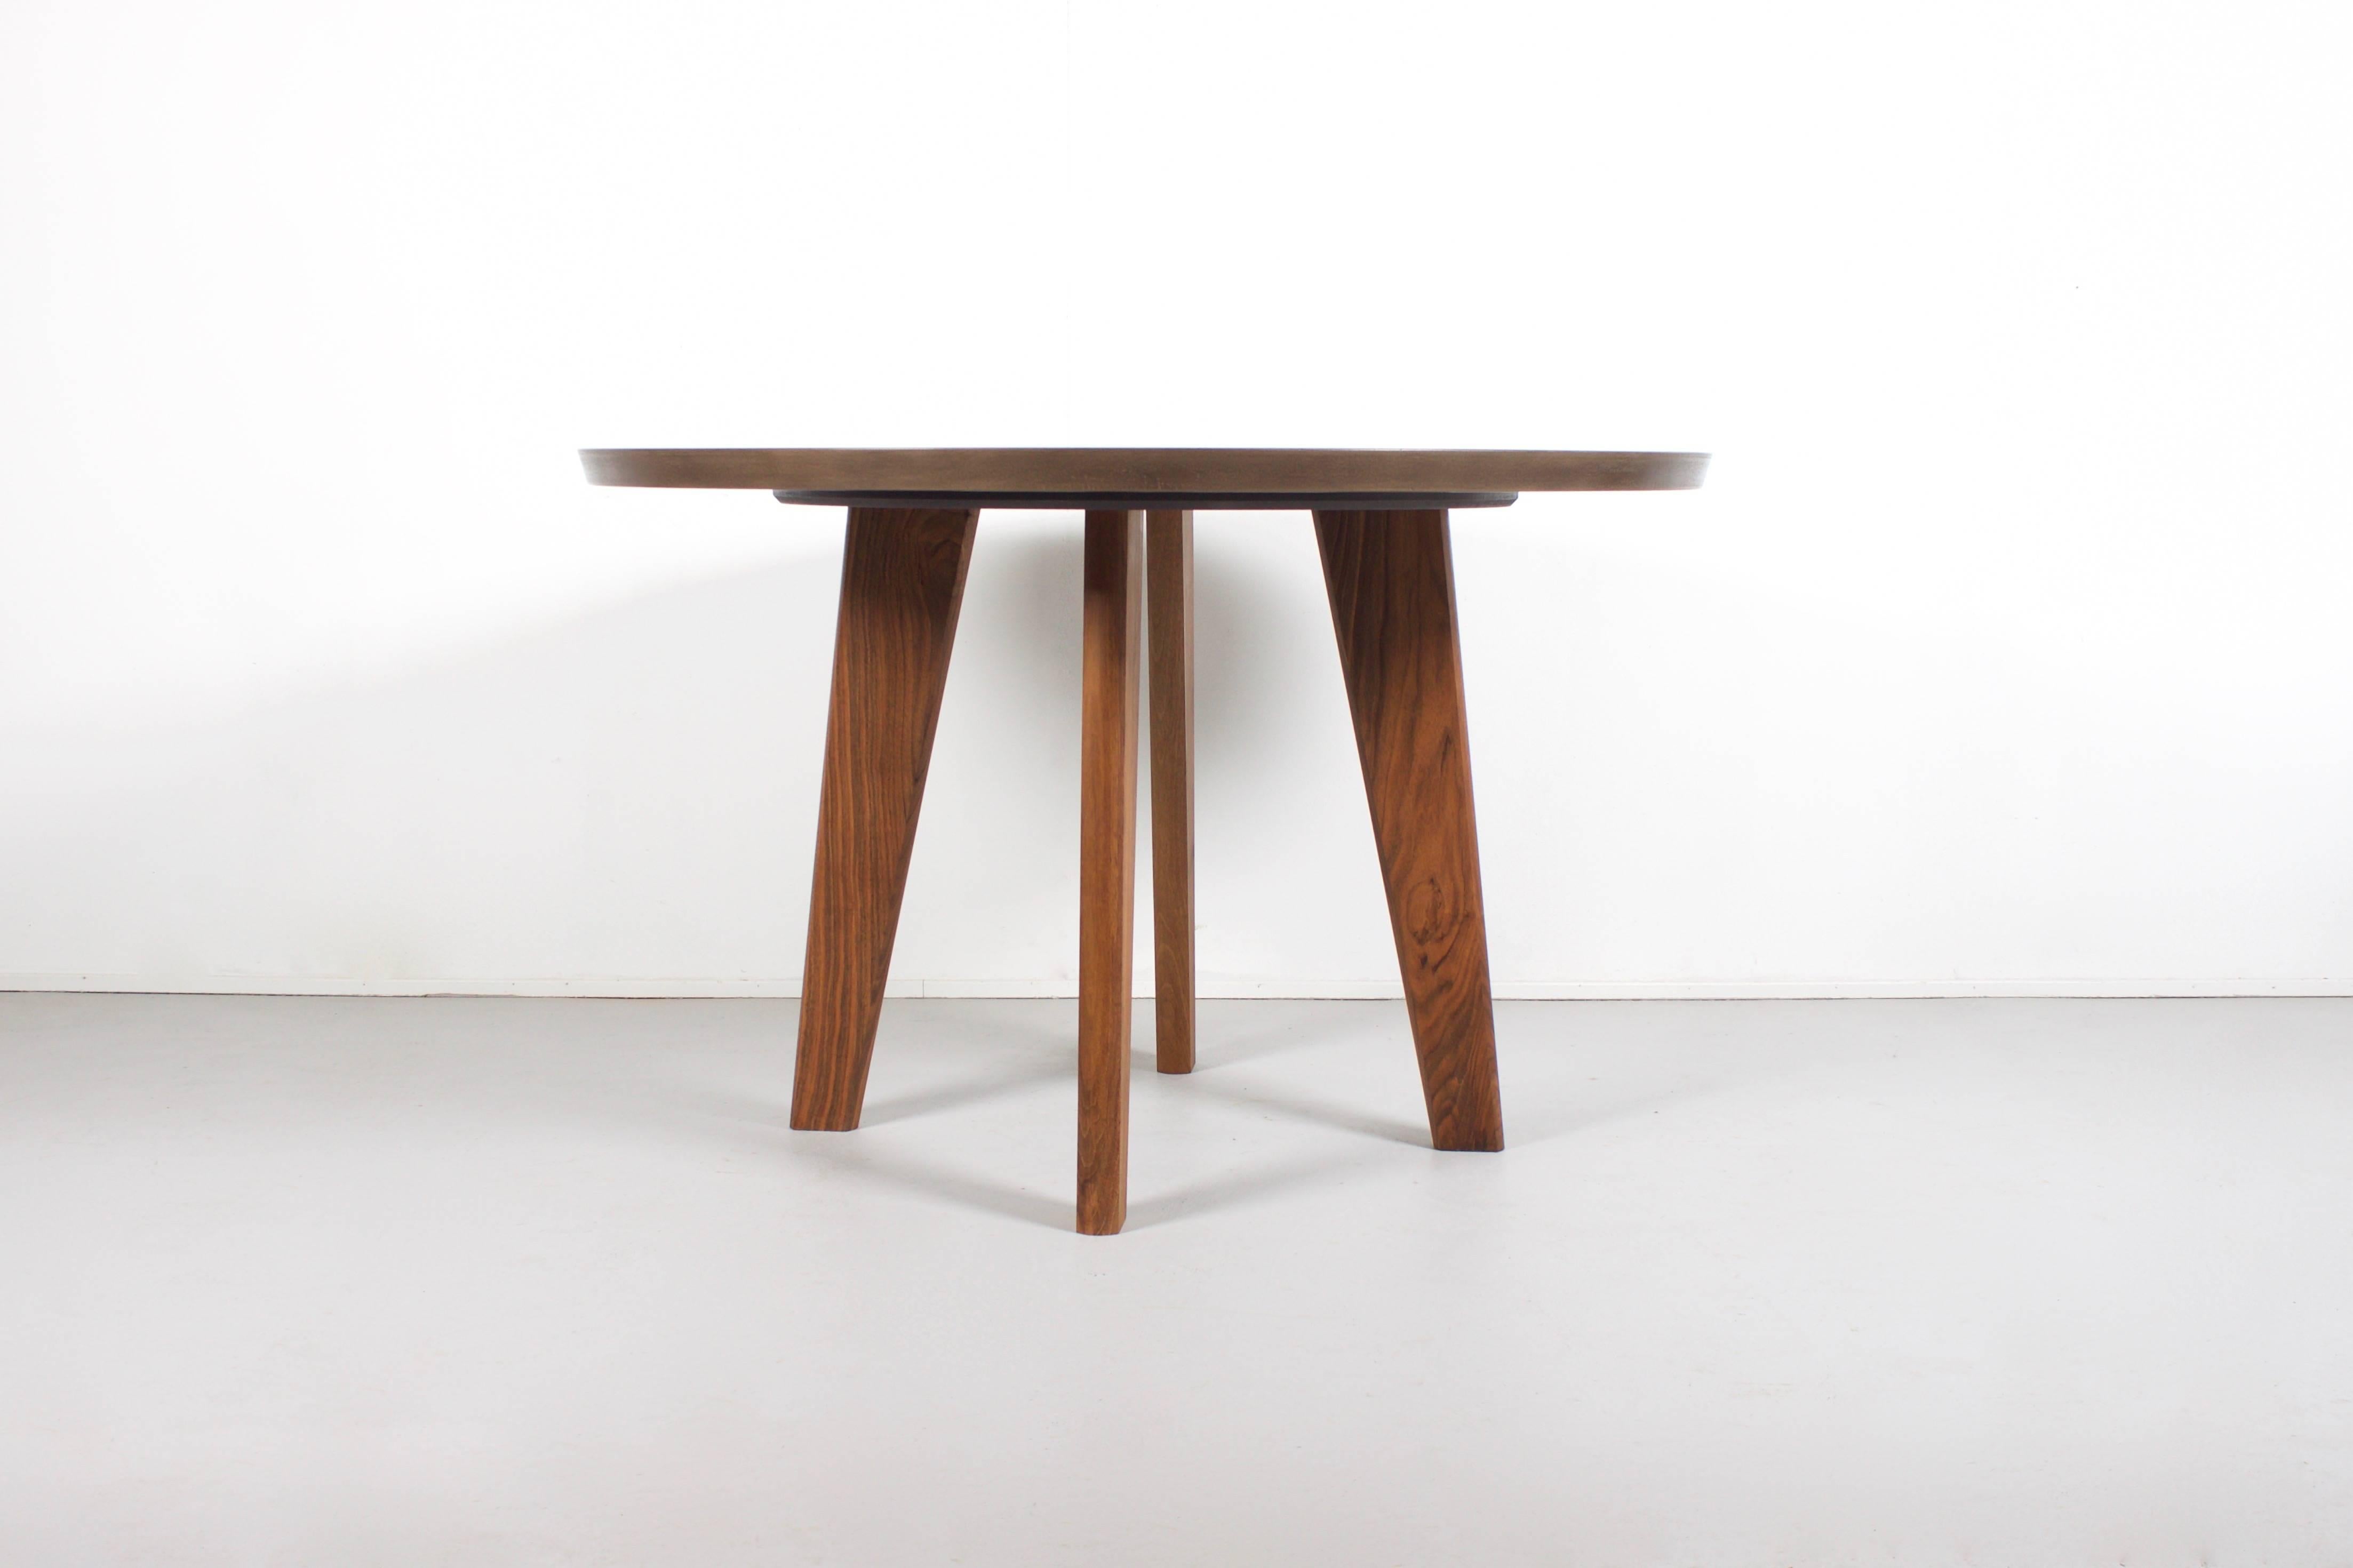 Beautiful contemporary round dining table.

This table is equipped with feet in solid walnut which have been oiled. 

The top is made from a polished ceramic with a brown marble look.

This top has many advantages: it is scratchproof, stain